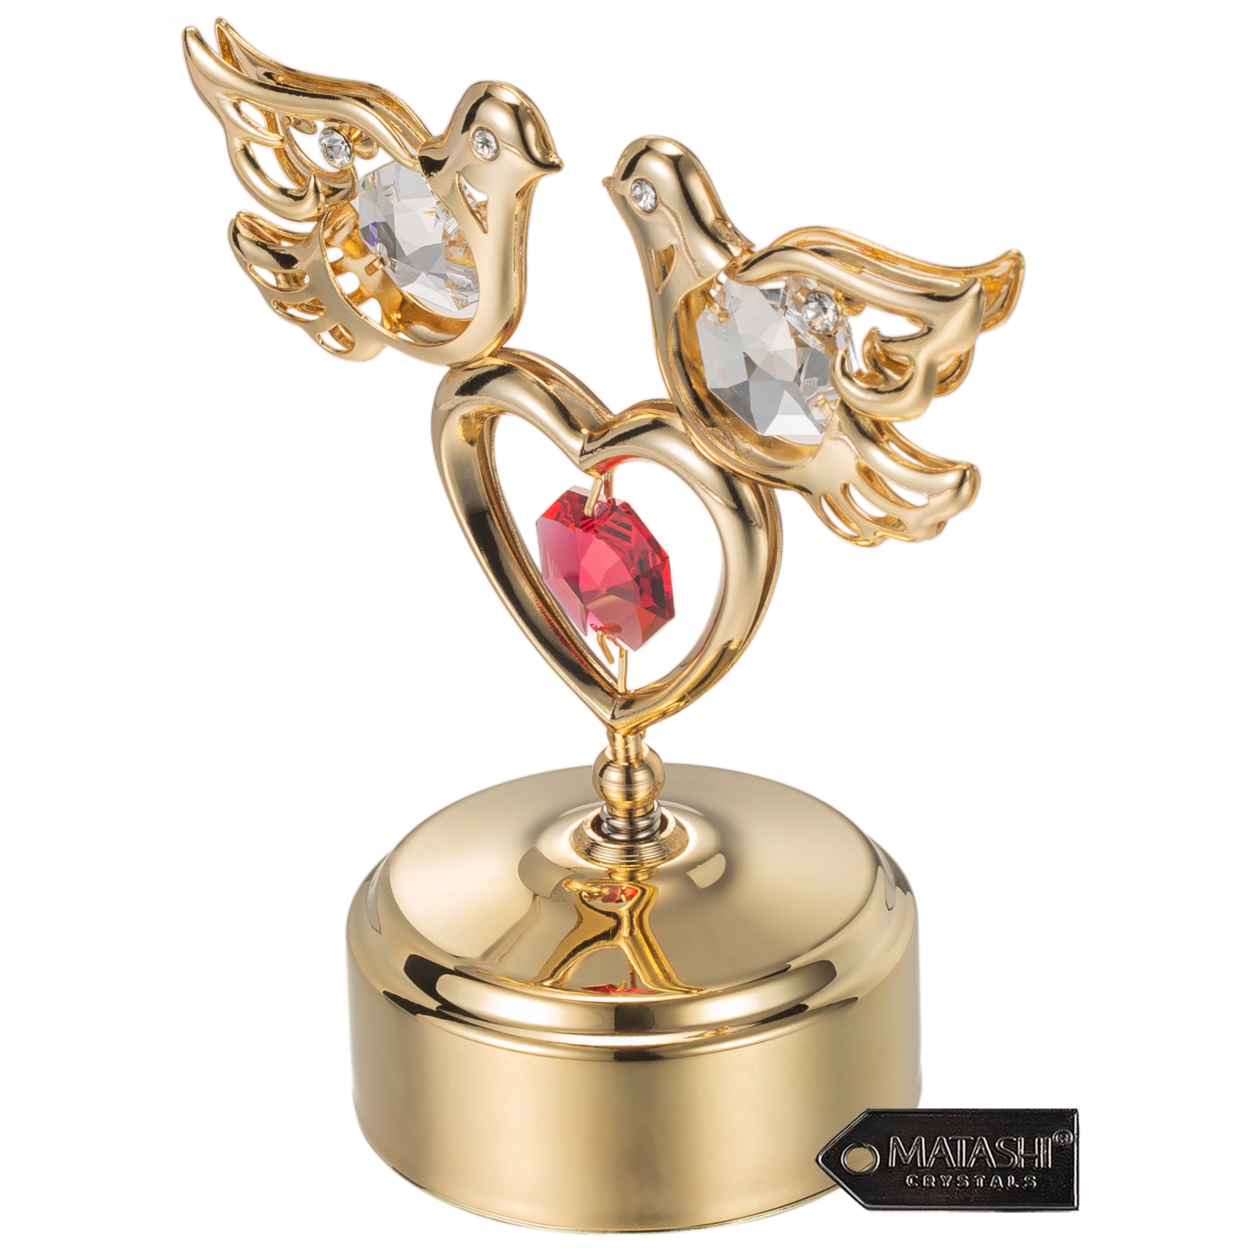 24K Gold Plated Music Box With Clear Crystal Studded Love Doves Red Crystal Studded Heart Figurine On A Smooth Base By Matashi